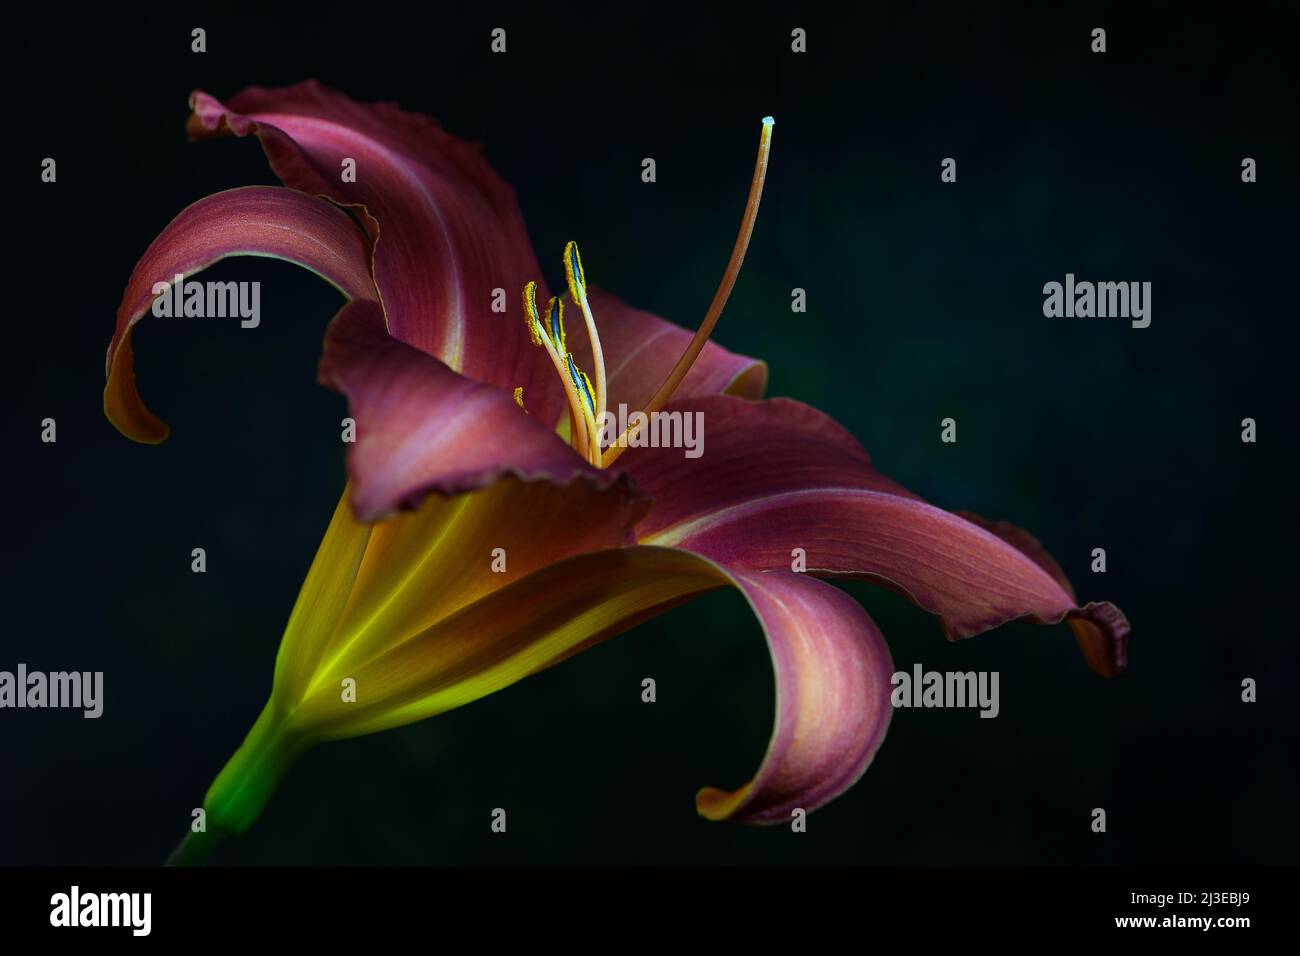 A peach coloured Day Lily -Hemerocallis family- flower in soft, strong dark mood lighting with the Stigma lit up; captured in a Studio Stock Photo